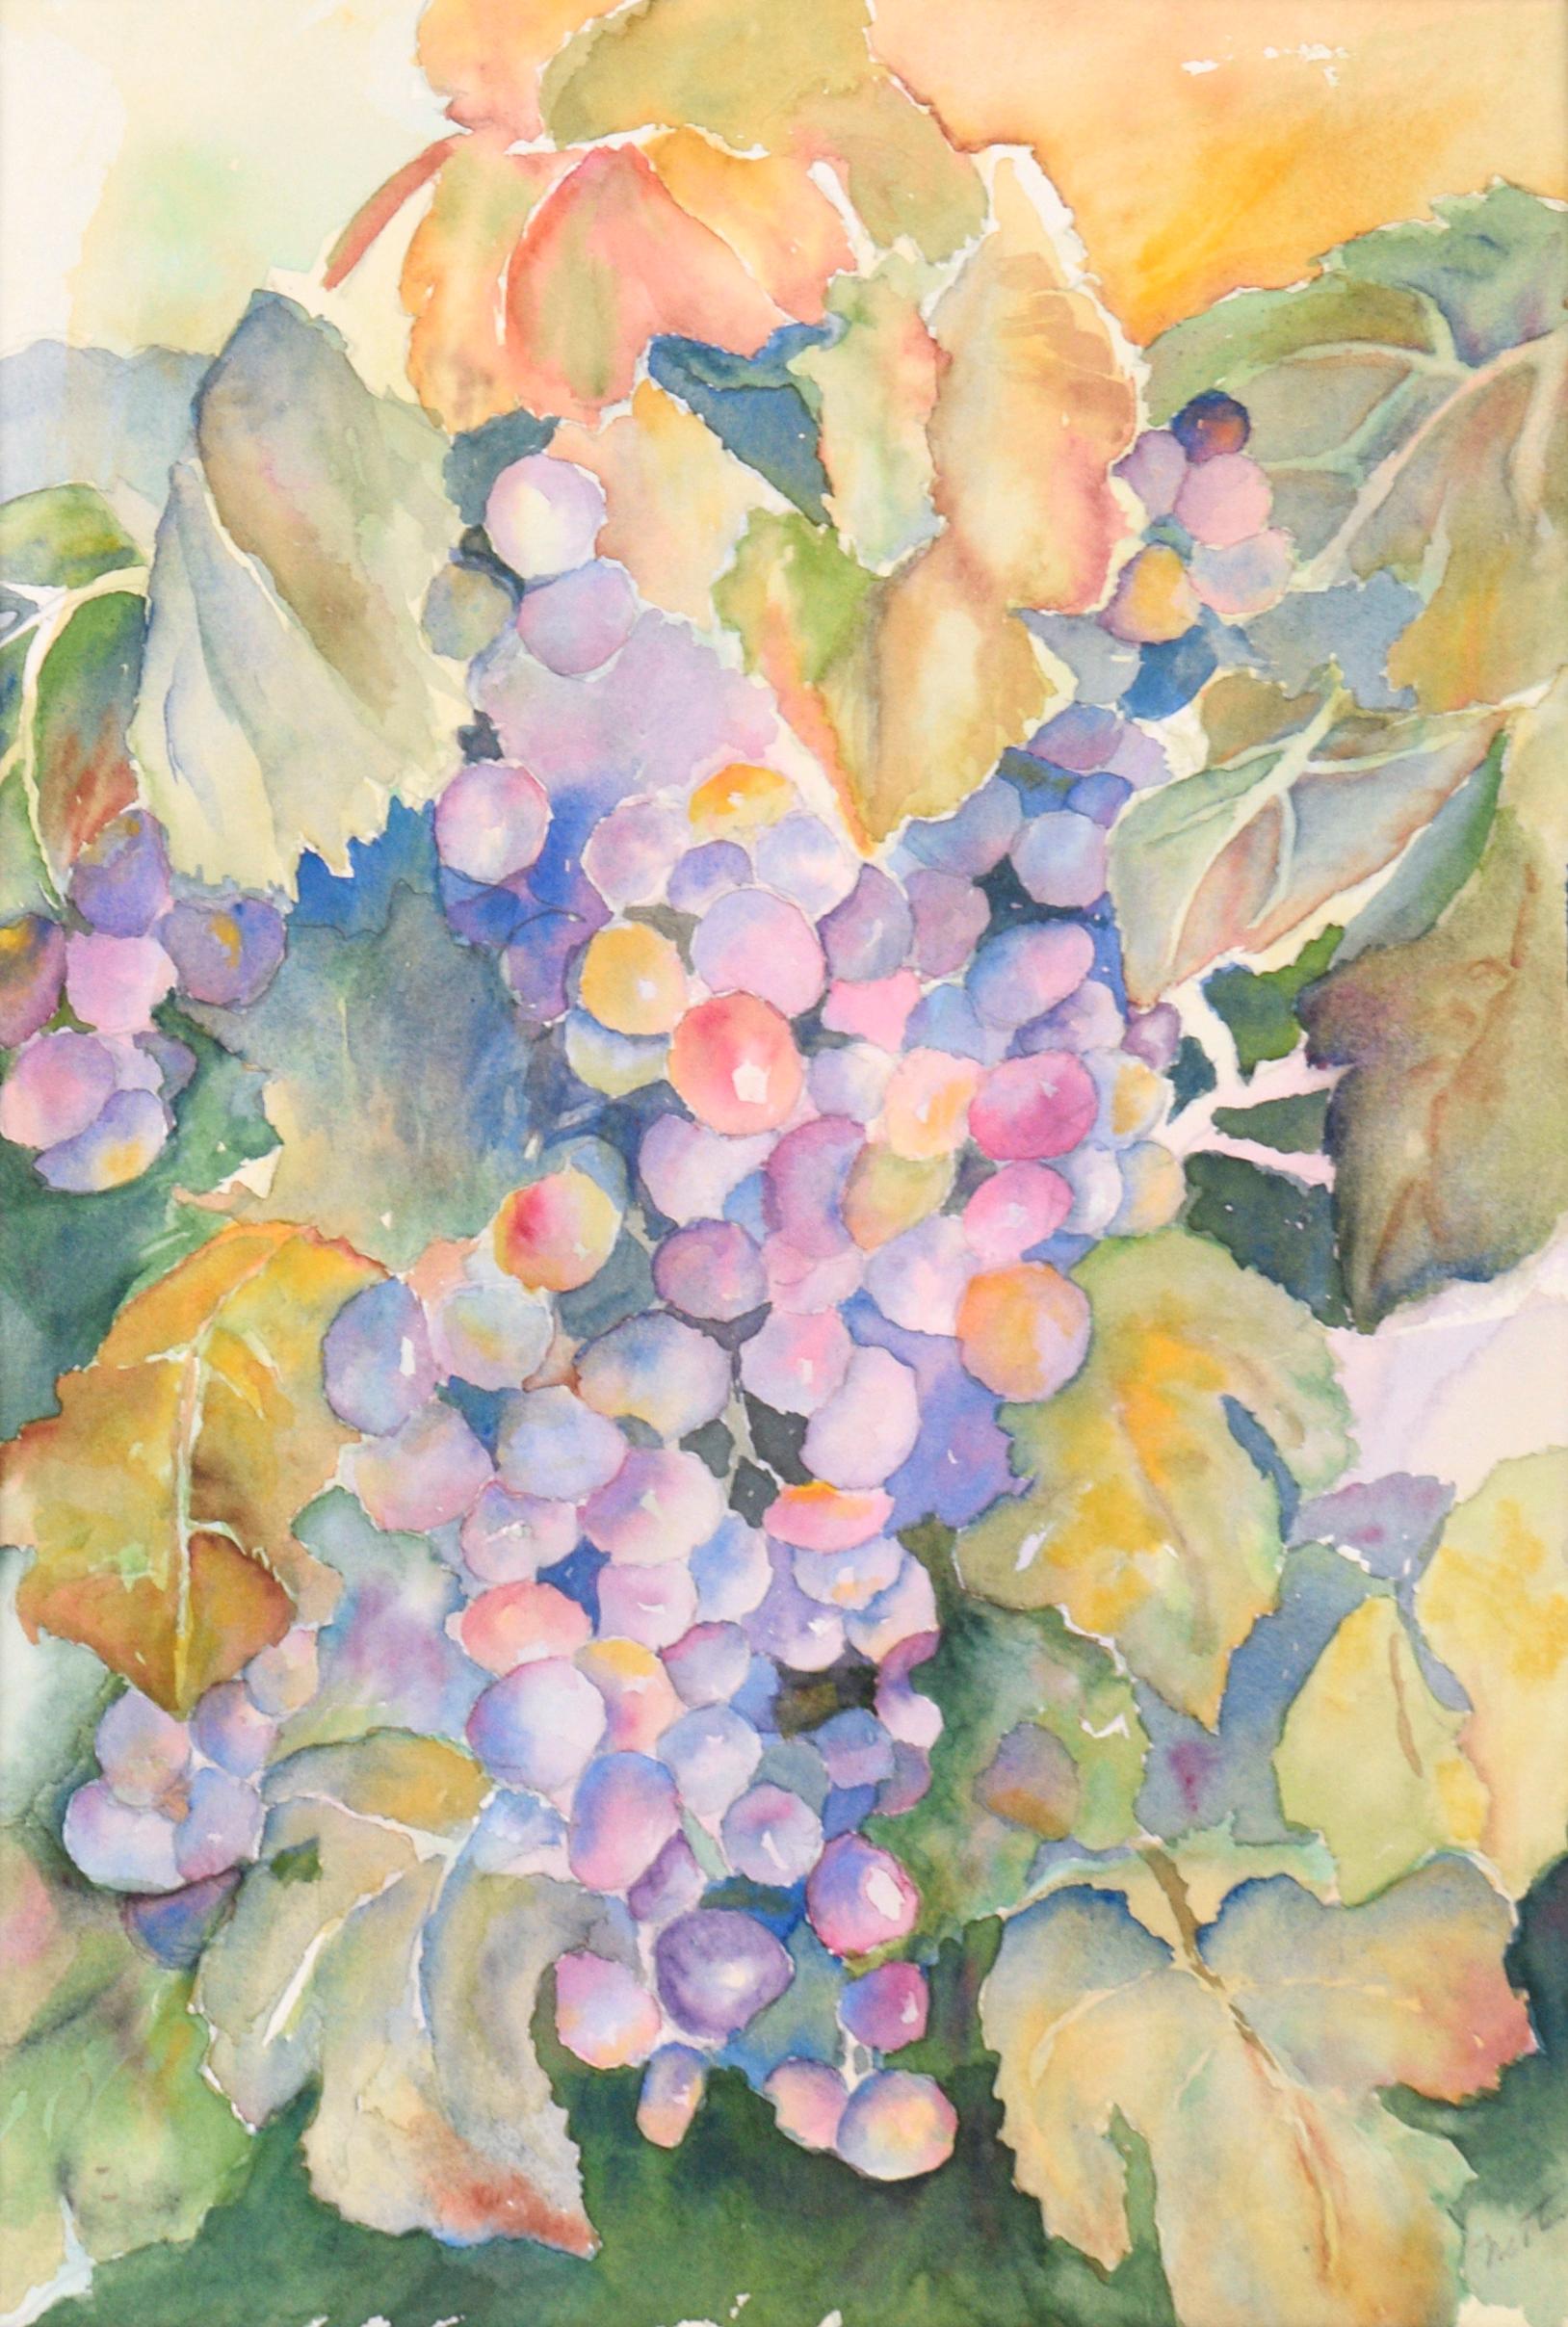 Grapes on the Vine - Art by Unknown